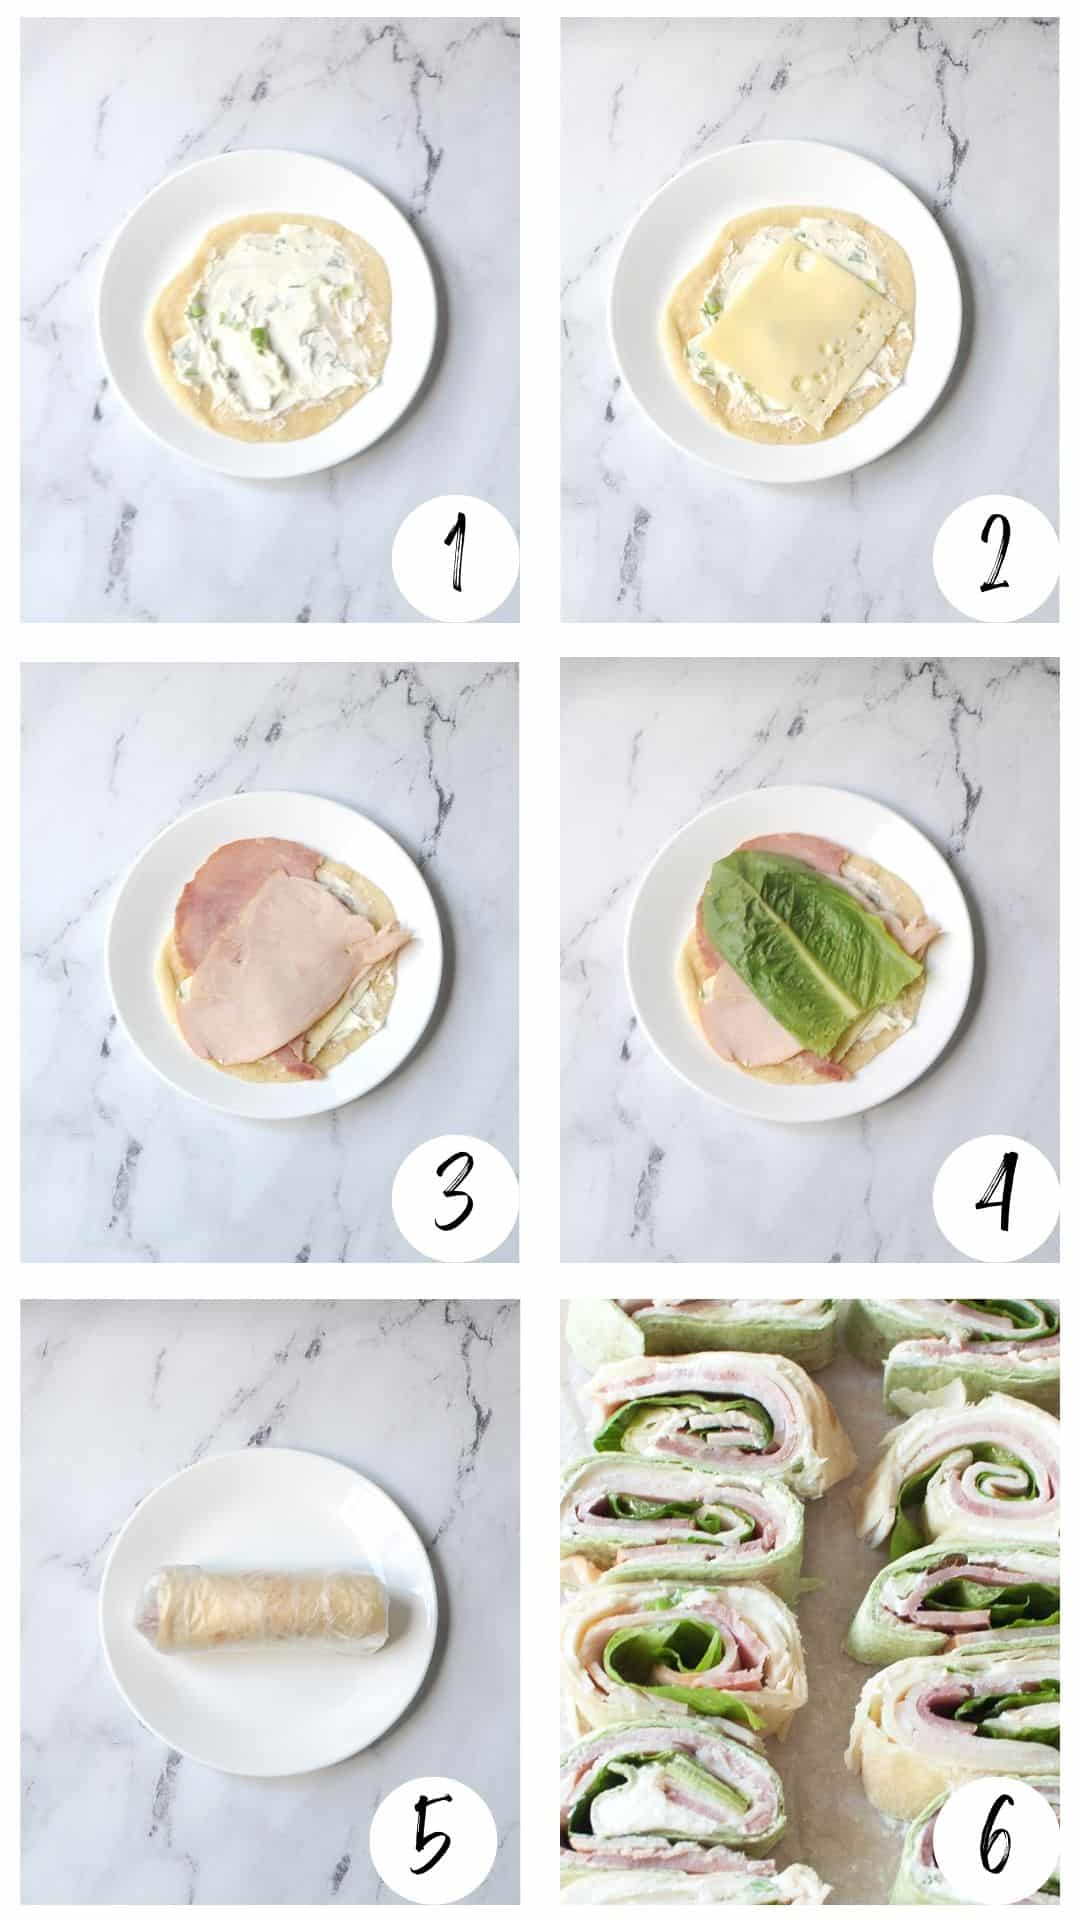 step by step guide on how to make pin wheel sandwiches